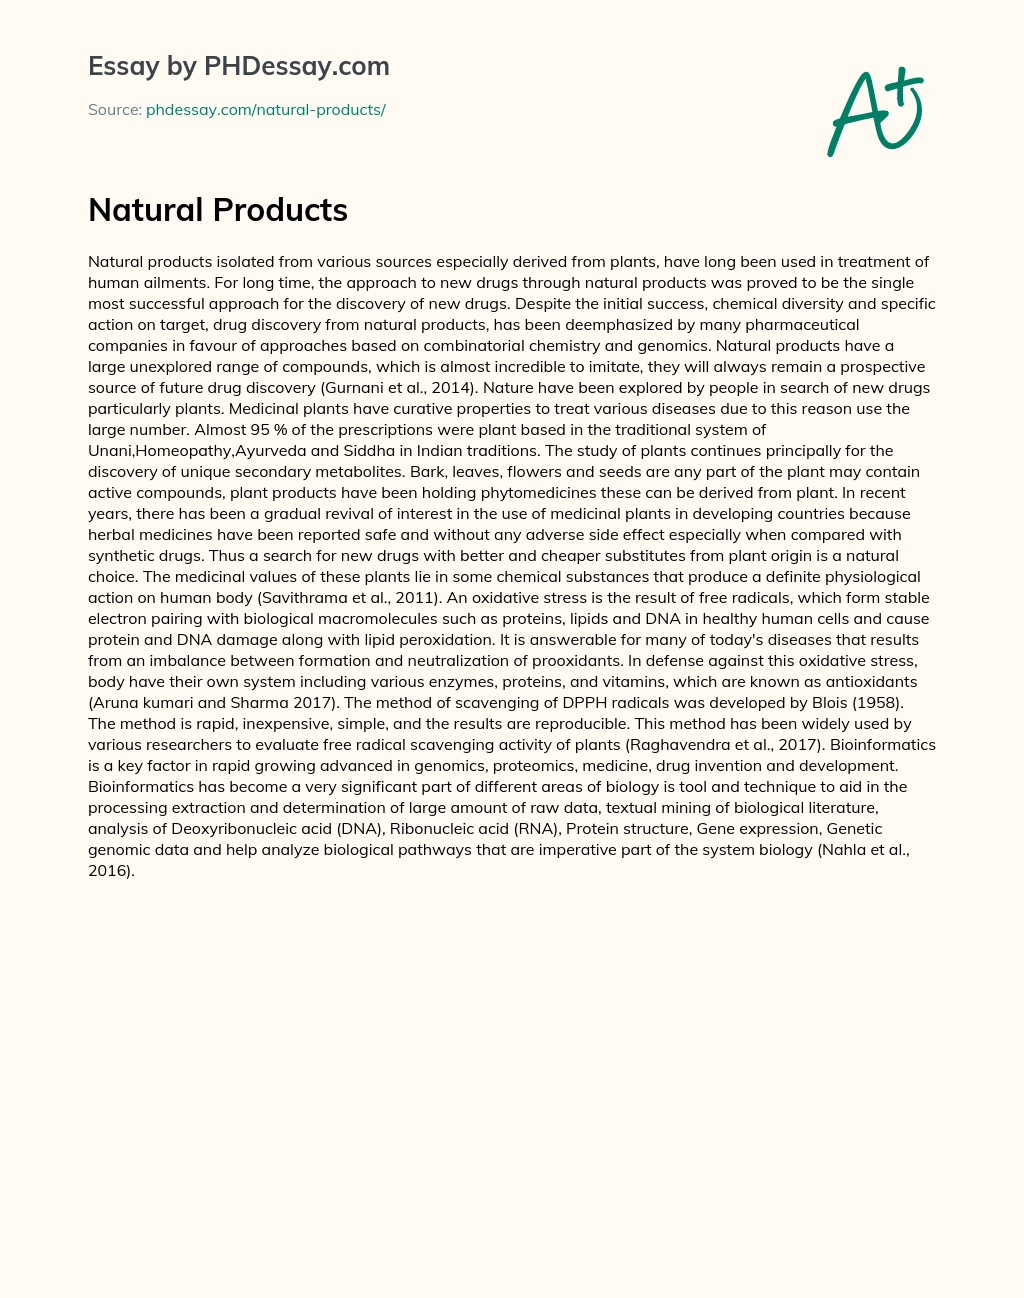 Natural Products essay